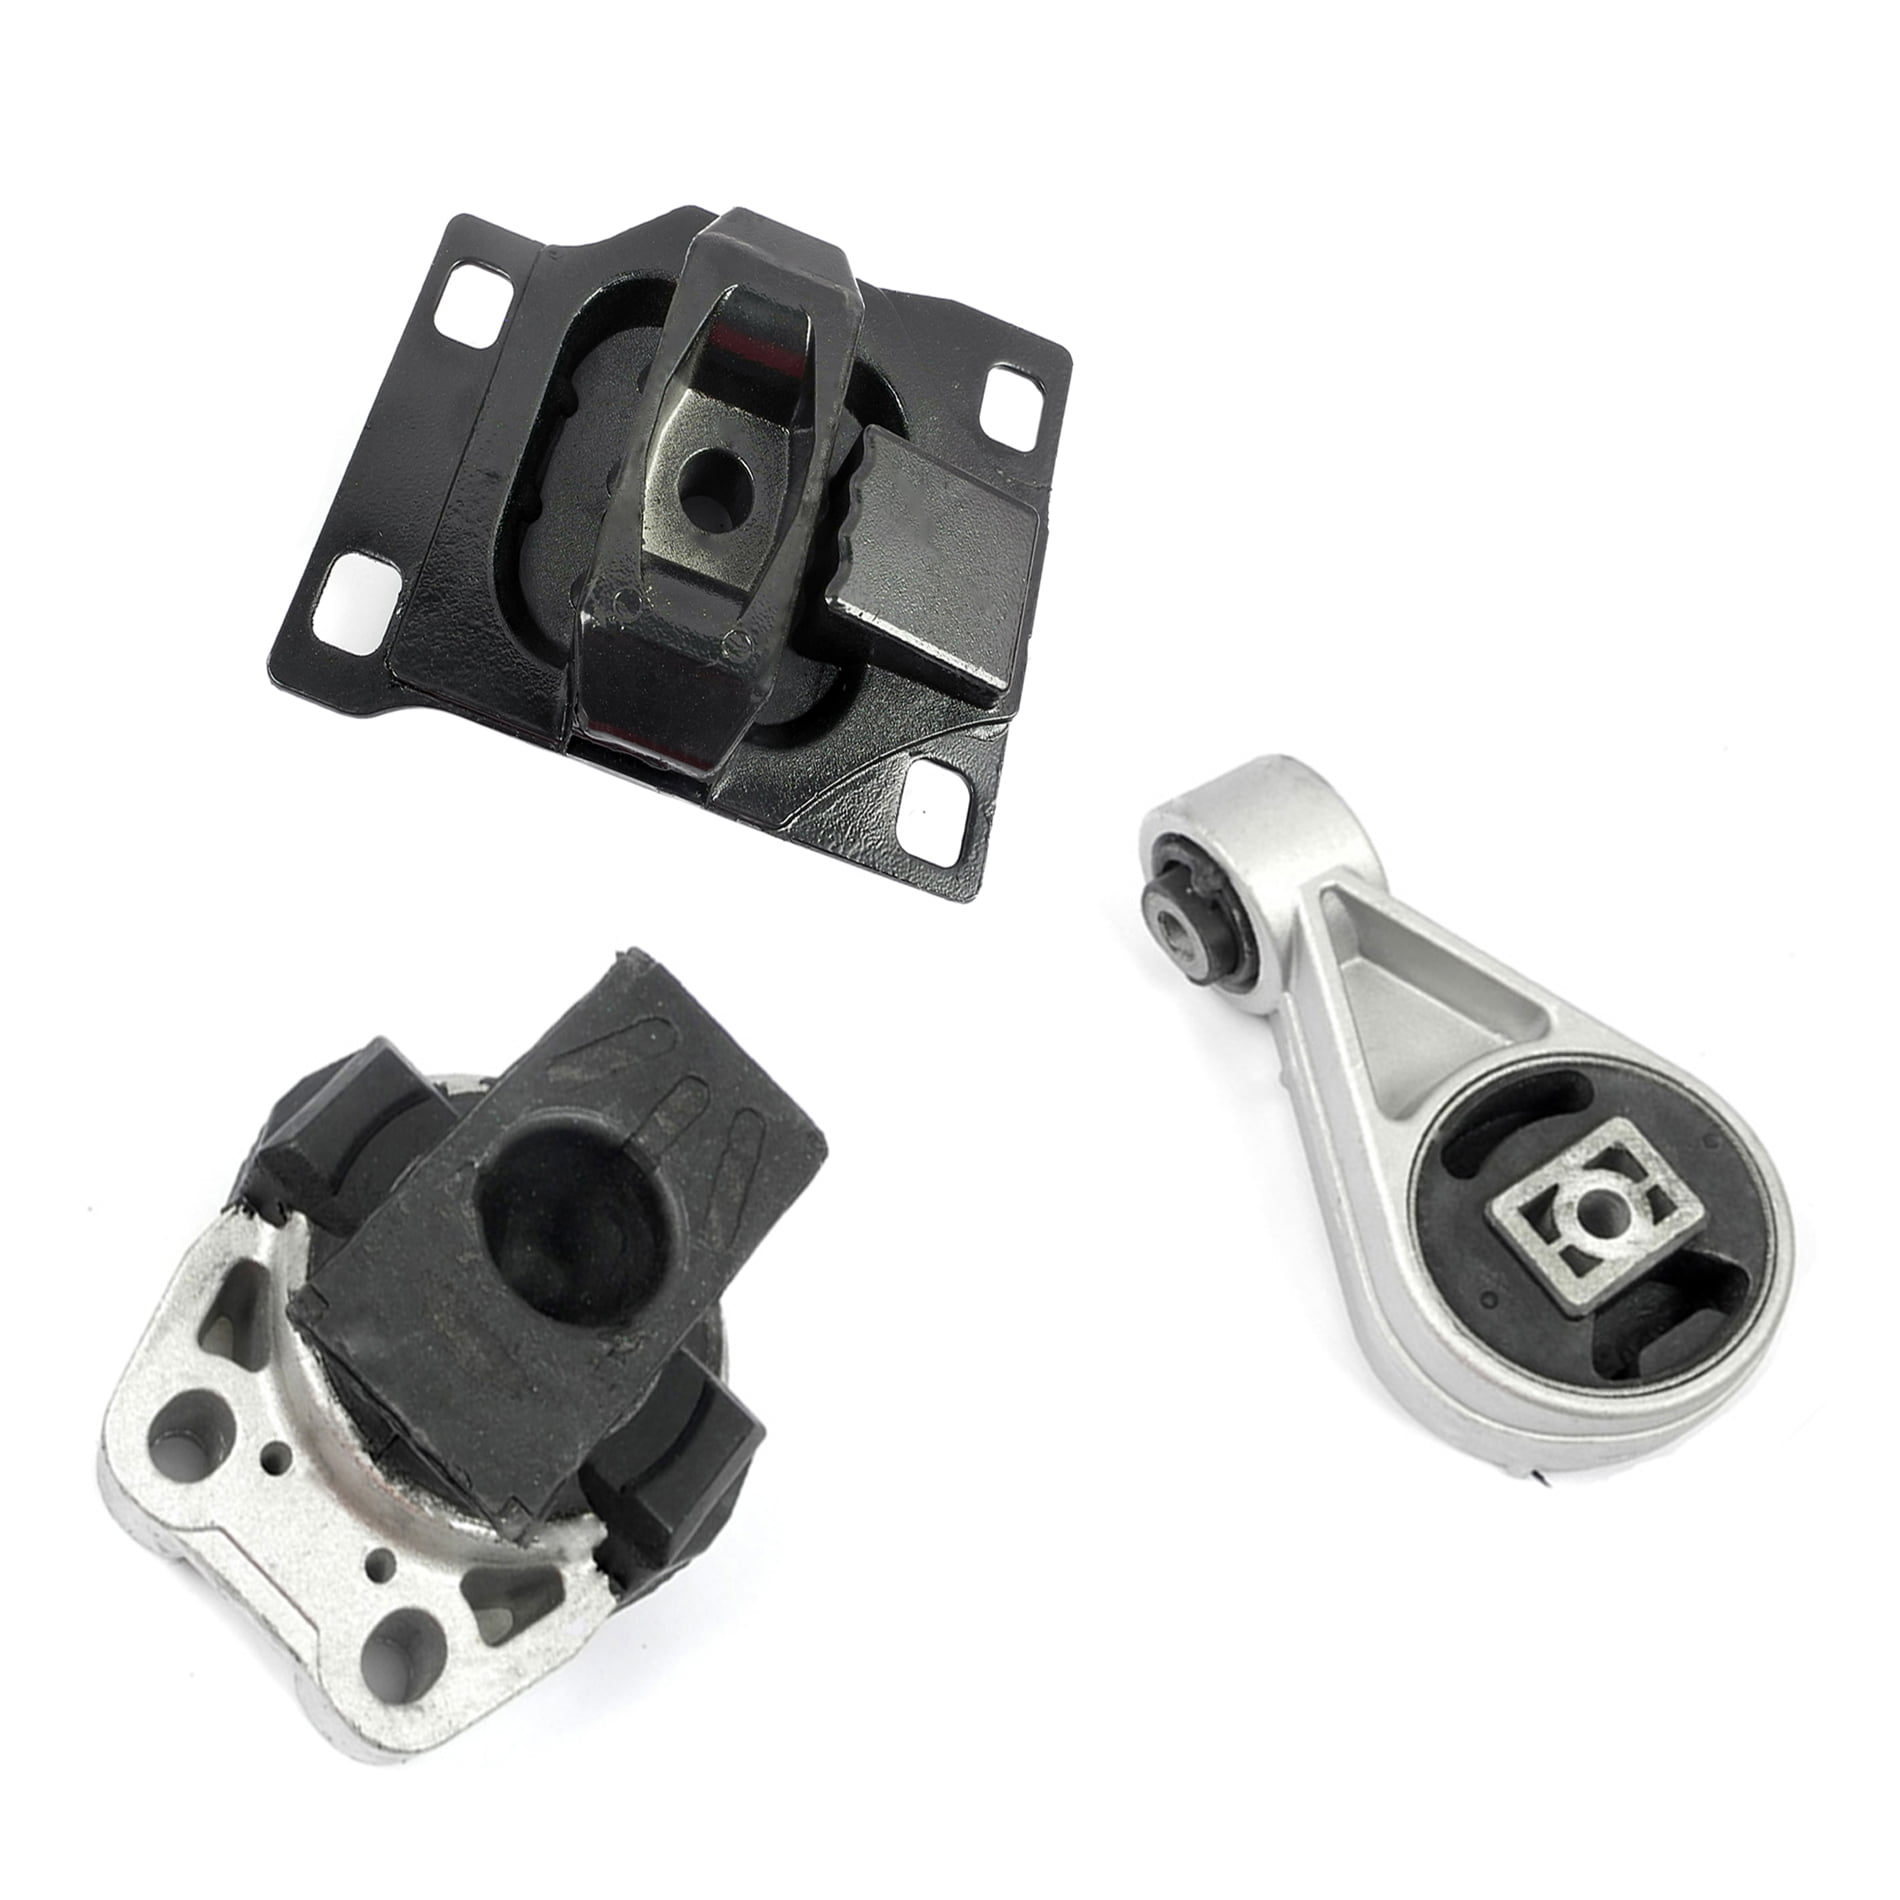 Motor and Transmission Mount Kit for Ford Ford Focus 05-07 4 Cyl 2.0L Eng Automatic Transmission 